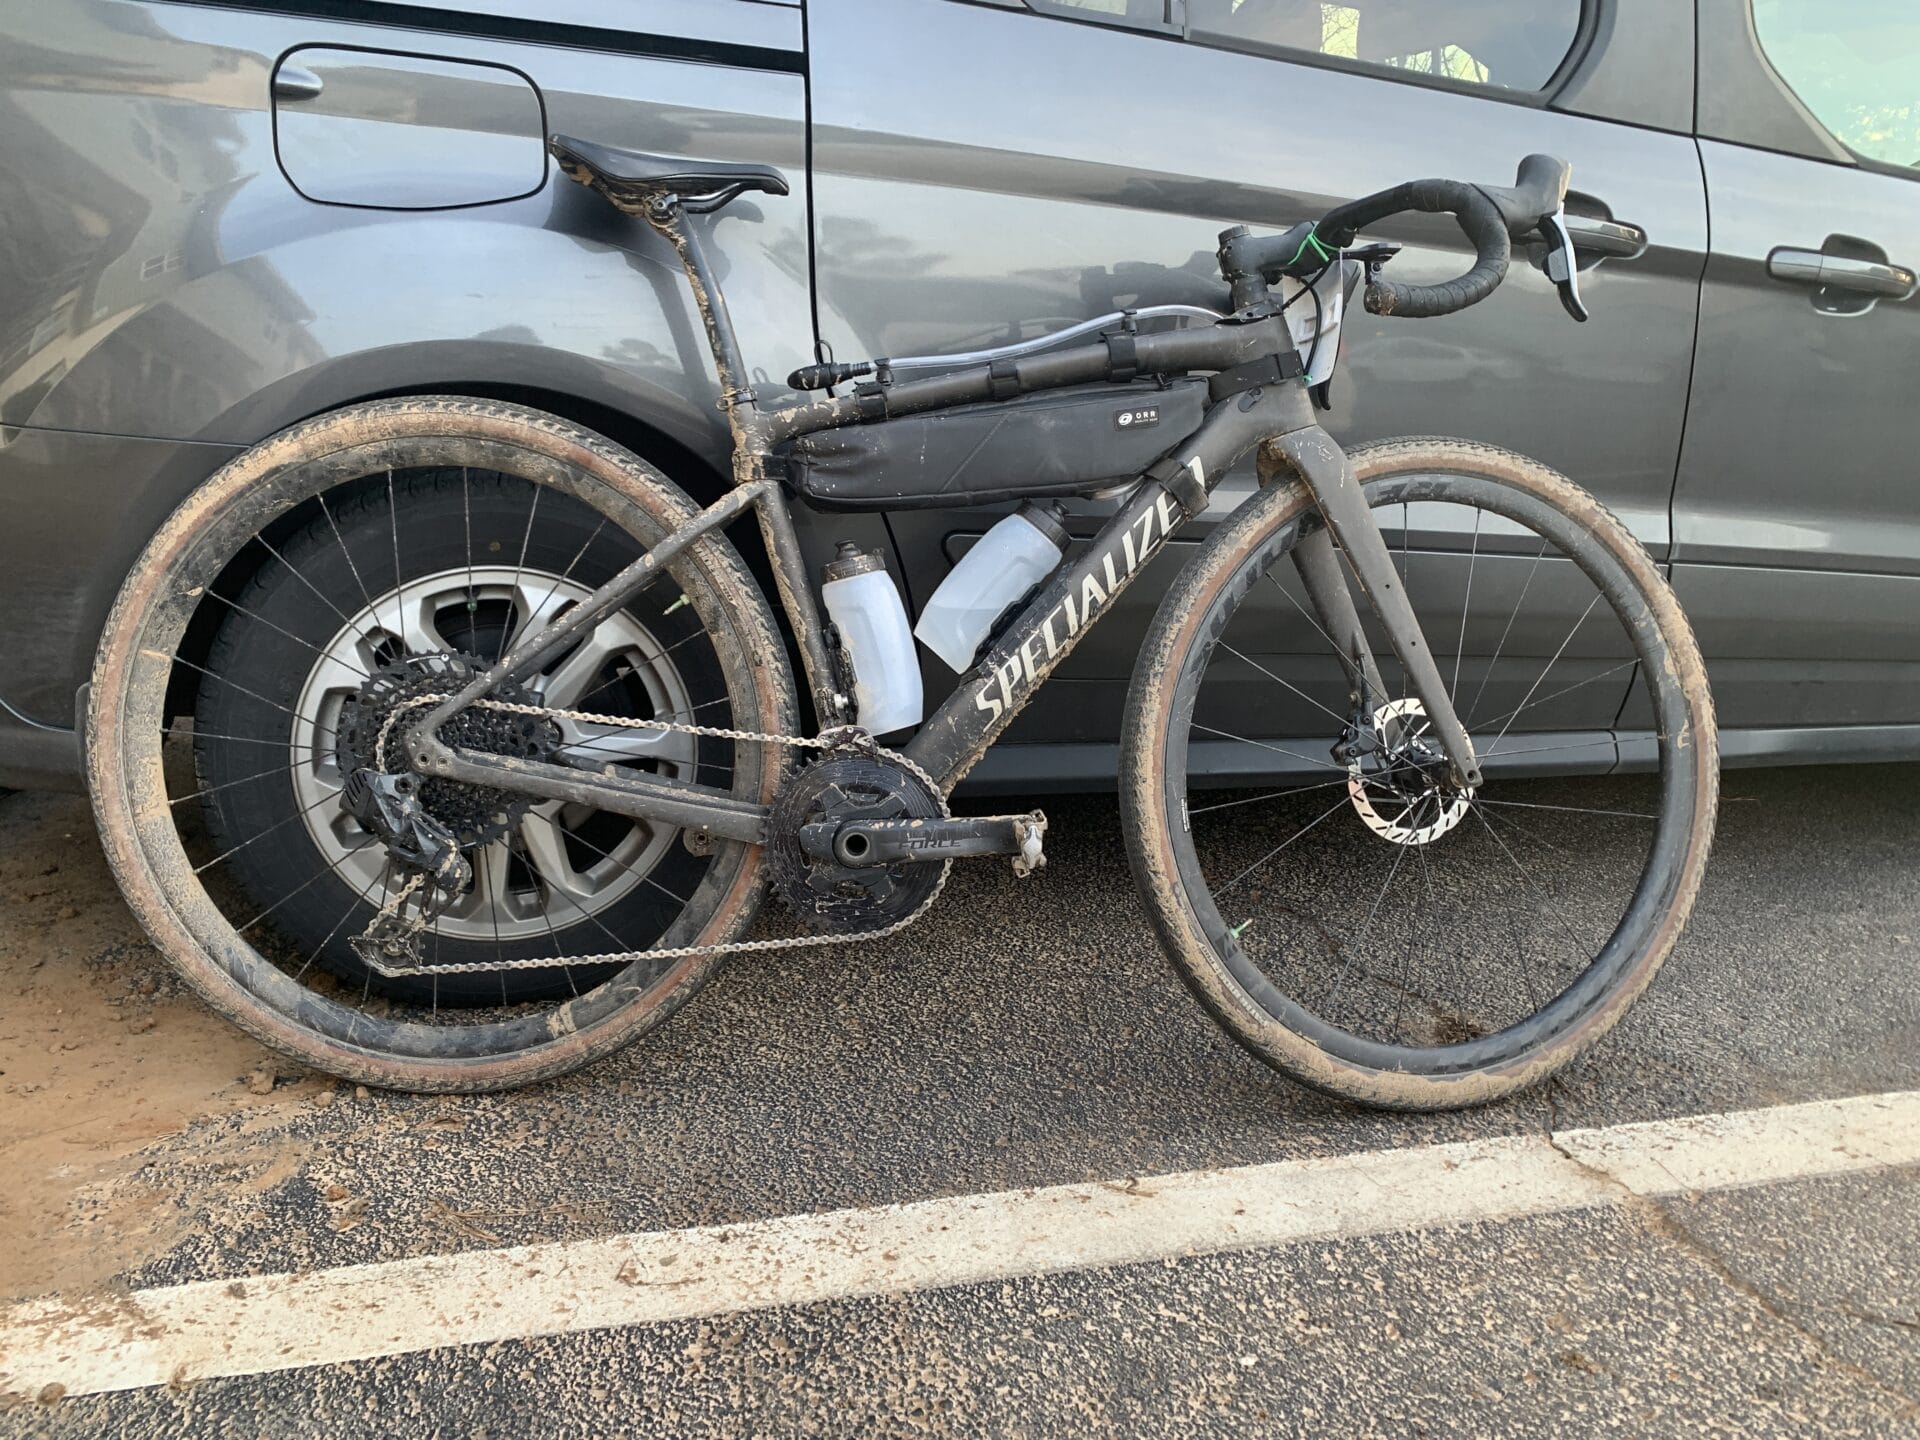 Gravel bike after race with mud